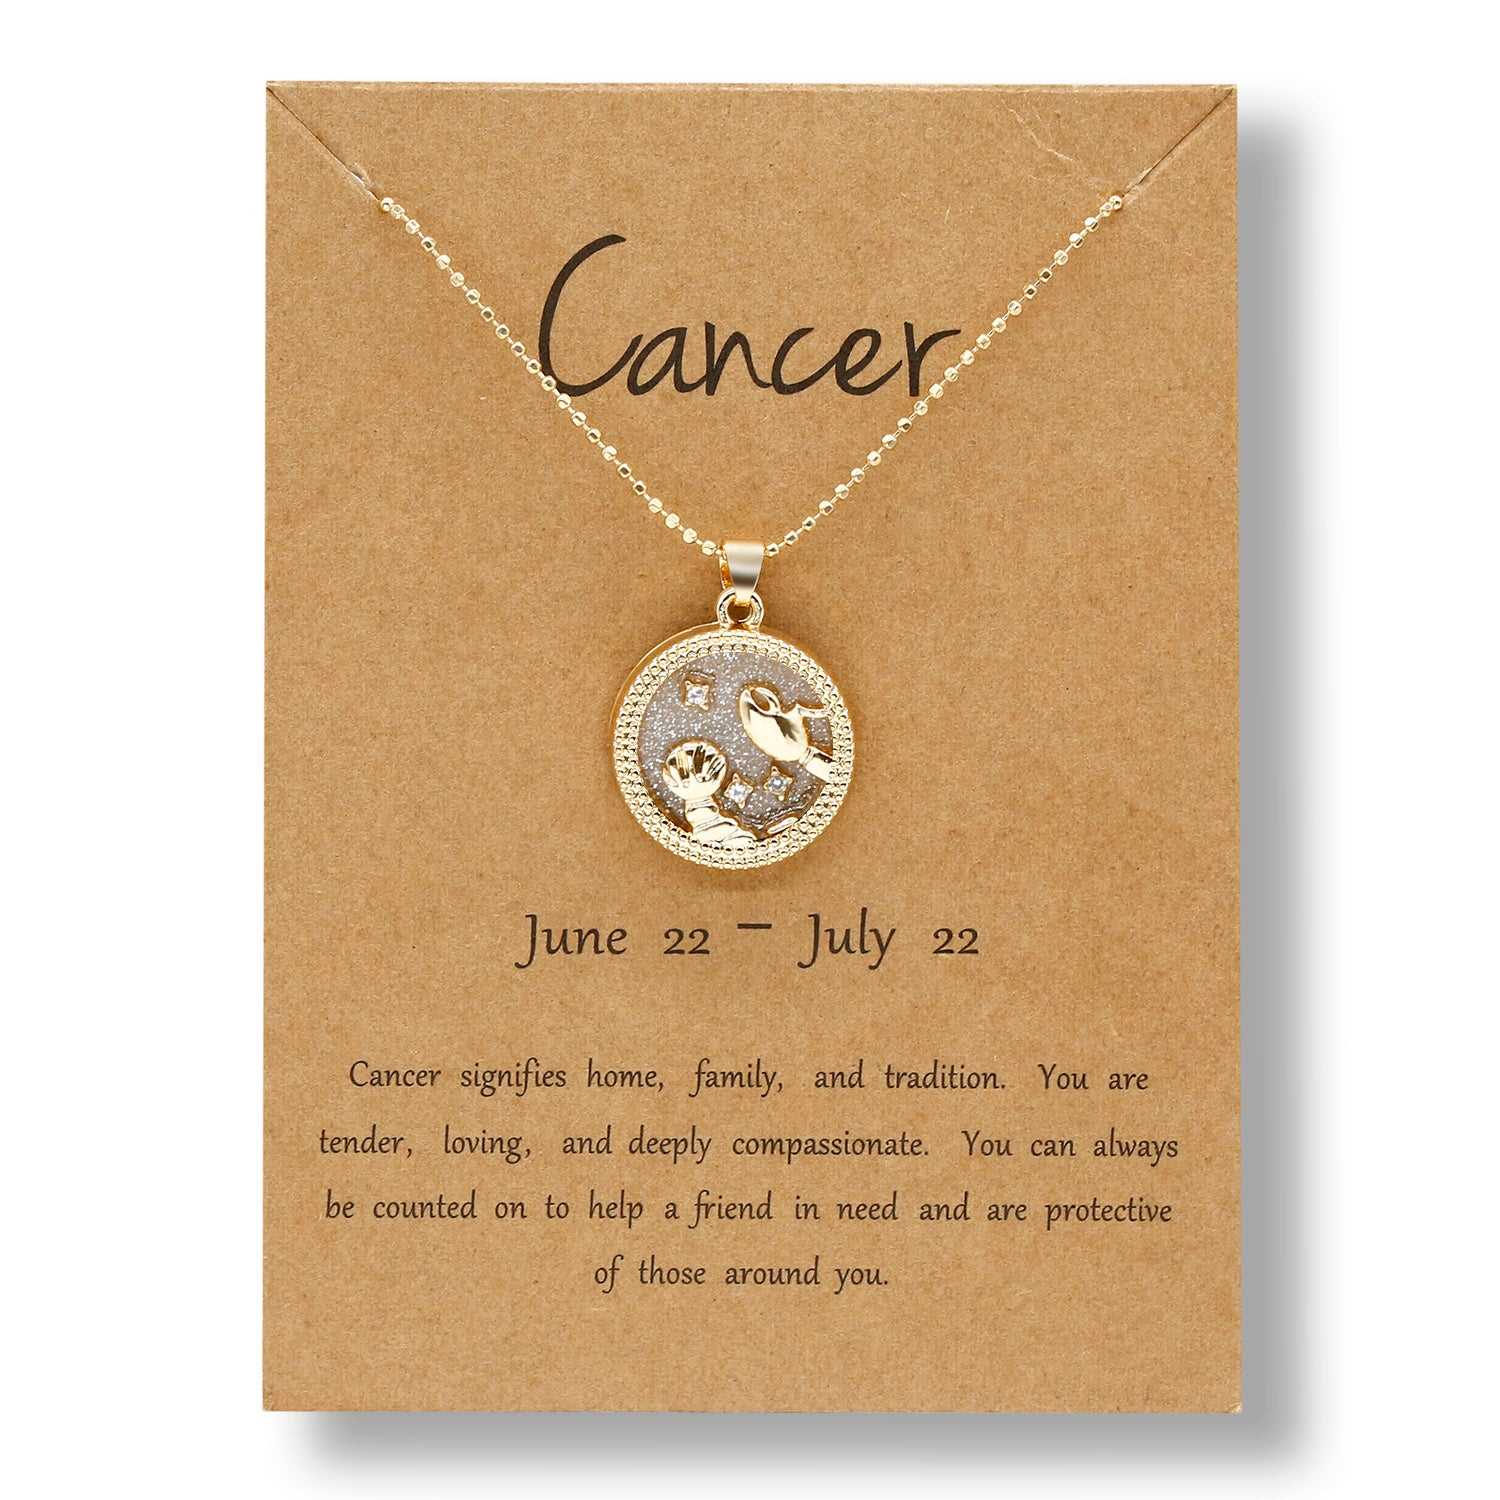 Moonlight Zodiac - Cancer freeshipping - FAB COUTURE